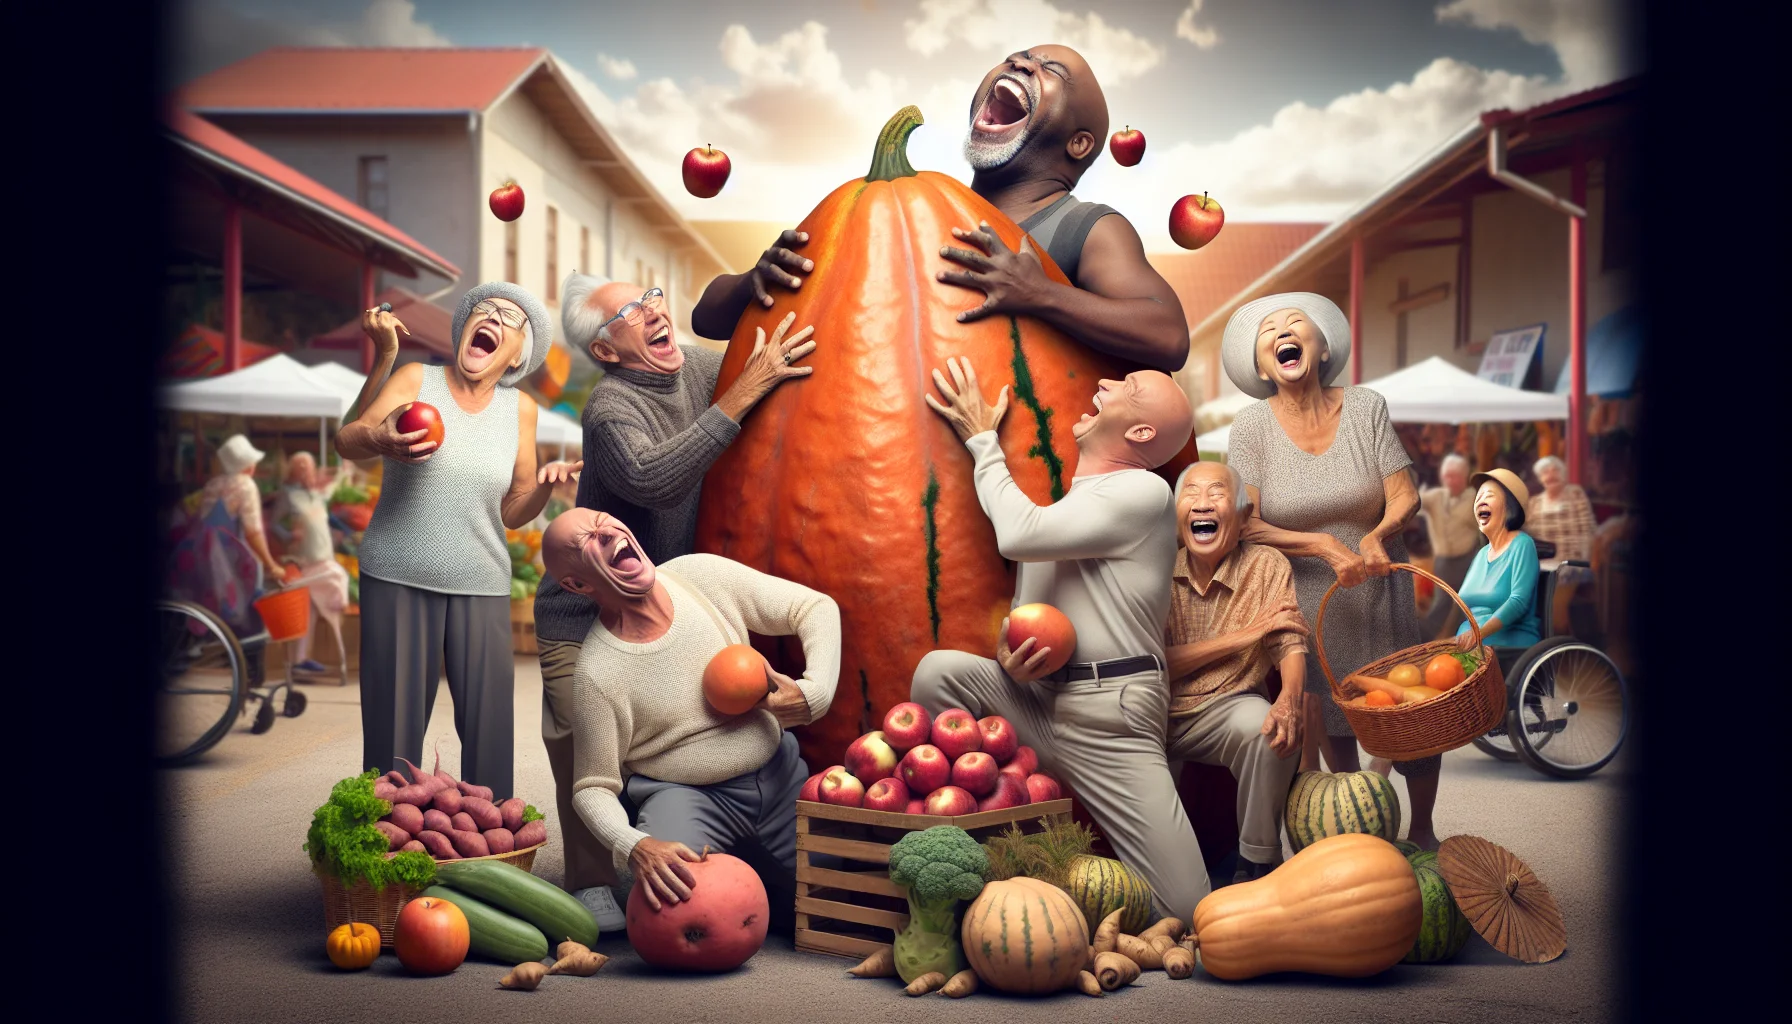 Create an amusing, photorealistic image of an eccentric senior citizen's weekly farmers market. This market is free for seniors! We see a Caucasian elderly woman joyfully doubles a giant leak as a stick, while an African elderly man tries to balance a pyramid of apples on his bald head, laughing heartily. A group of Hispanic old friends nearby are busy comparing the size of their sweet potatoes, everyone roaring with laughter. In the background, an Asian elderly couple is carrying a giant pumpkin together, a testament of their teamwork and shared love for healthy living.